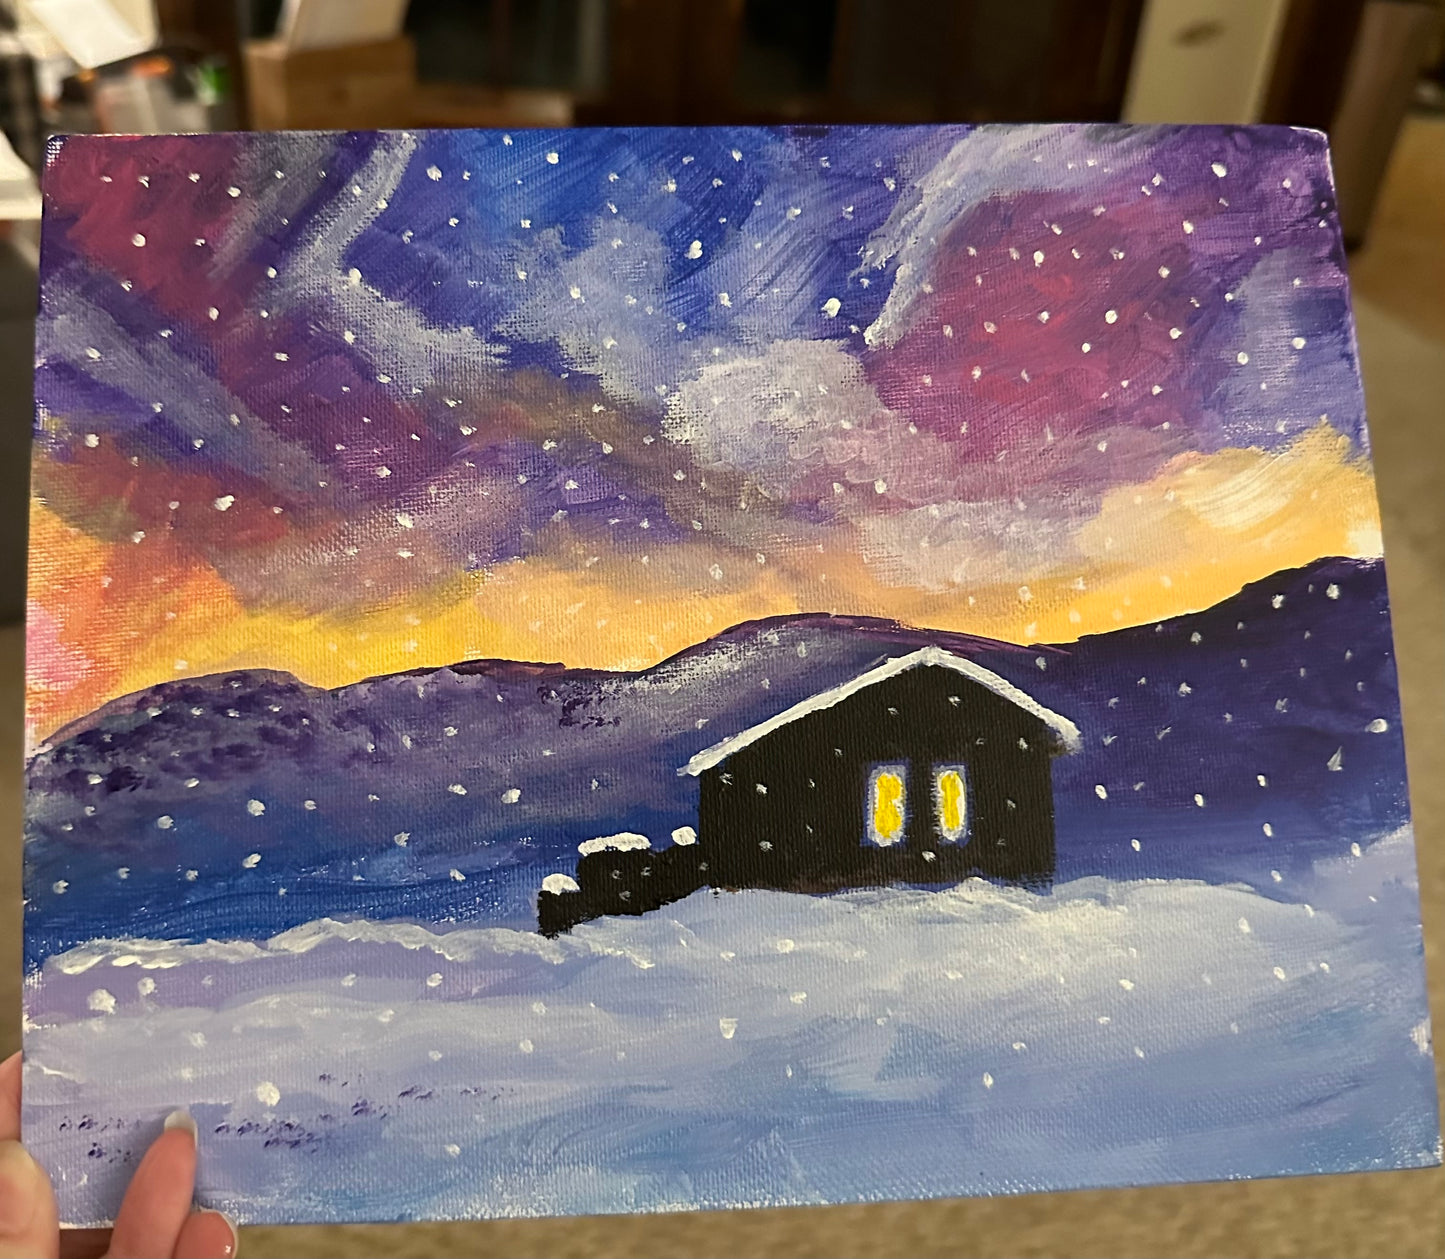 Acrylic Painting with Christy - March 9